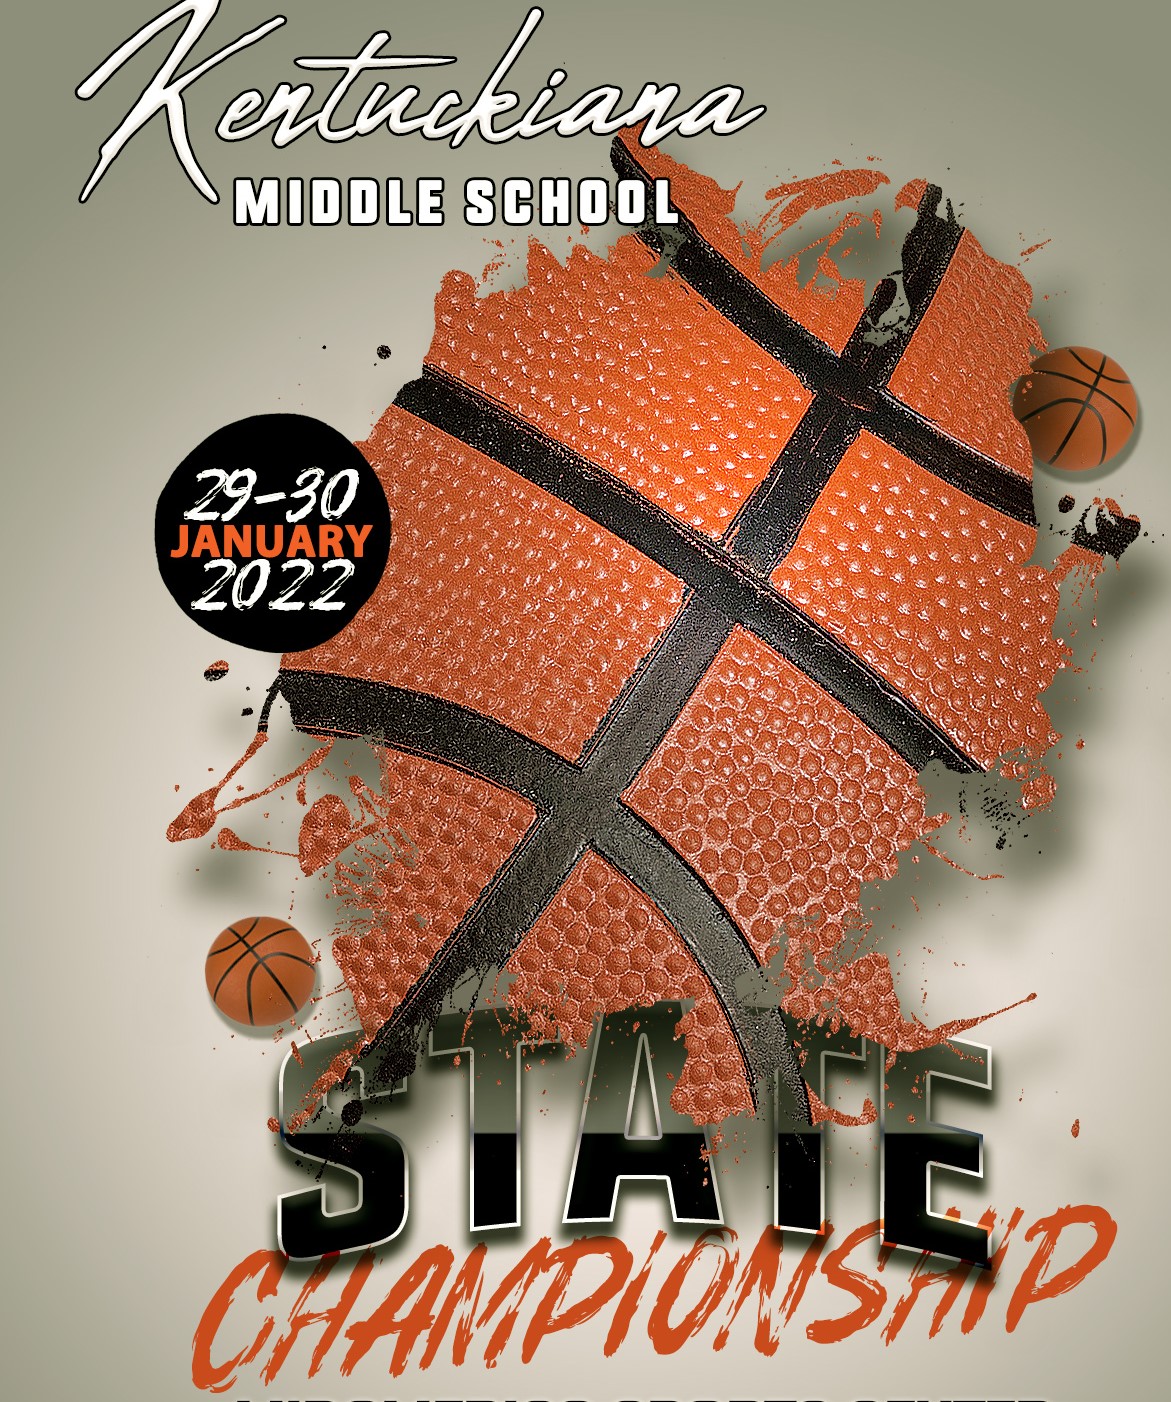 <span style="font-size: 14pt;"><strong><span style="color: #ff6600;">Kentuckiana Middle School <br />State Championship<br />Jan. 29-30, 2022</span><br /><a href="http://www.midwestbballtournaments.com/ViewEvent.aspx?EID=943">Click Here for Details</a></strong></span>